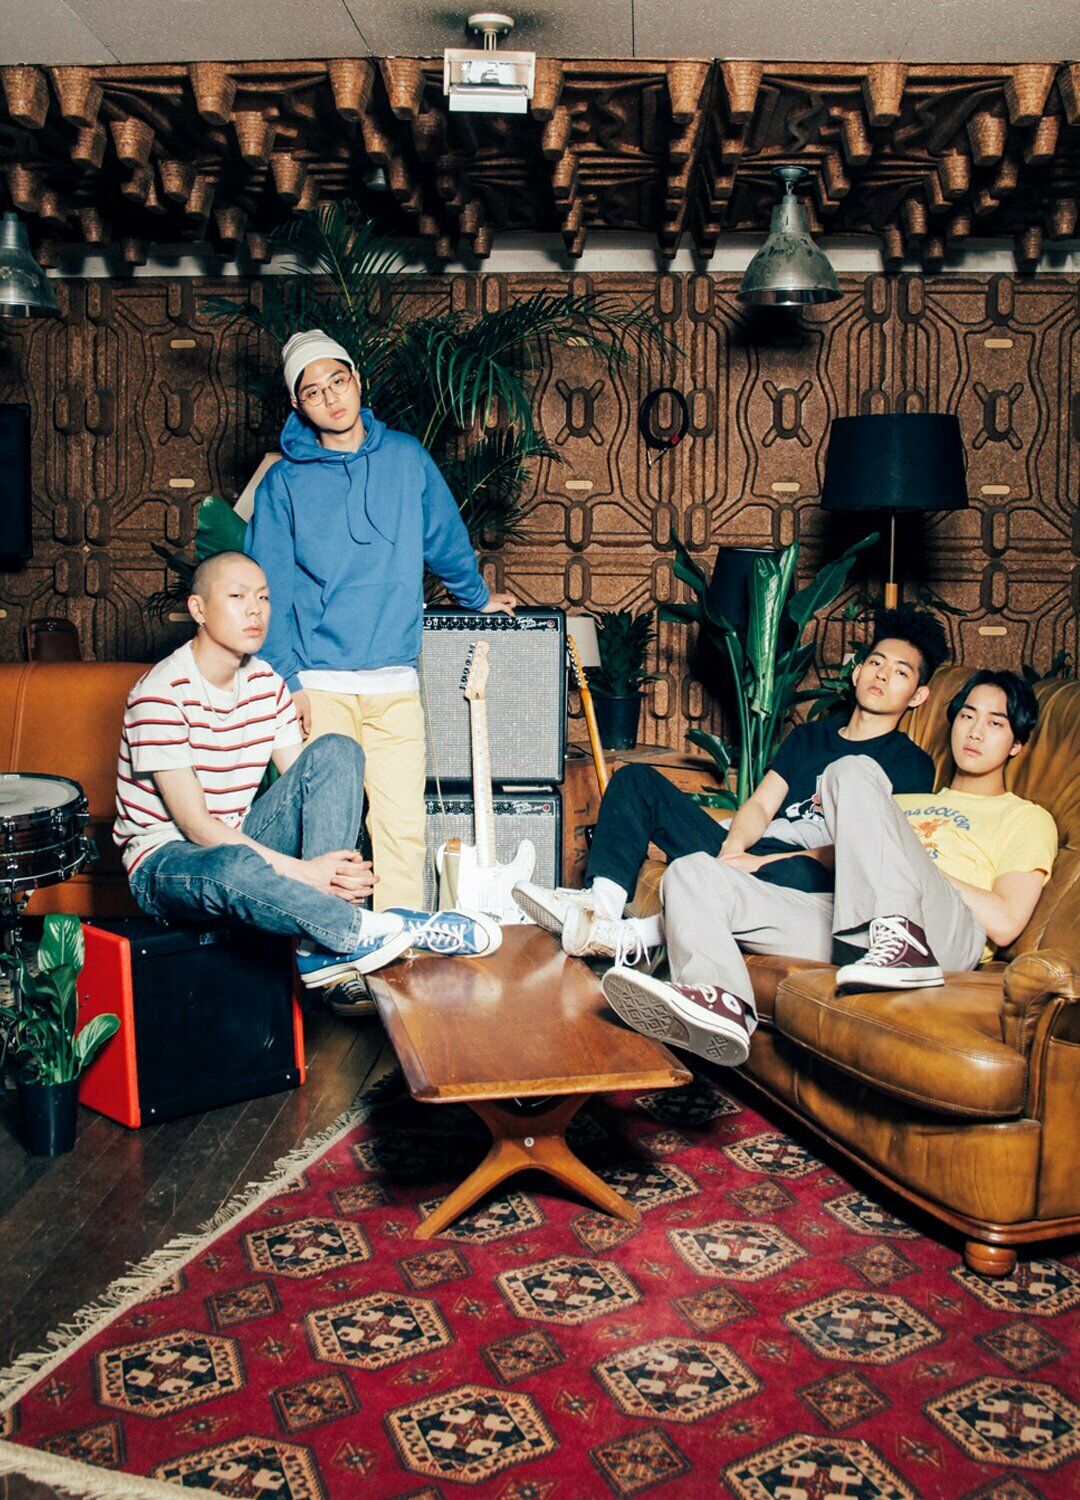 Hyukoh returned with a new album <With Love> a year after <24: How to find true love and happiness>. While Hyukoh's work m...